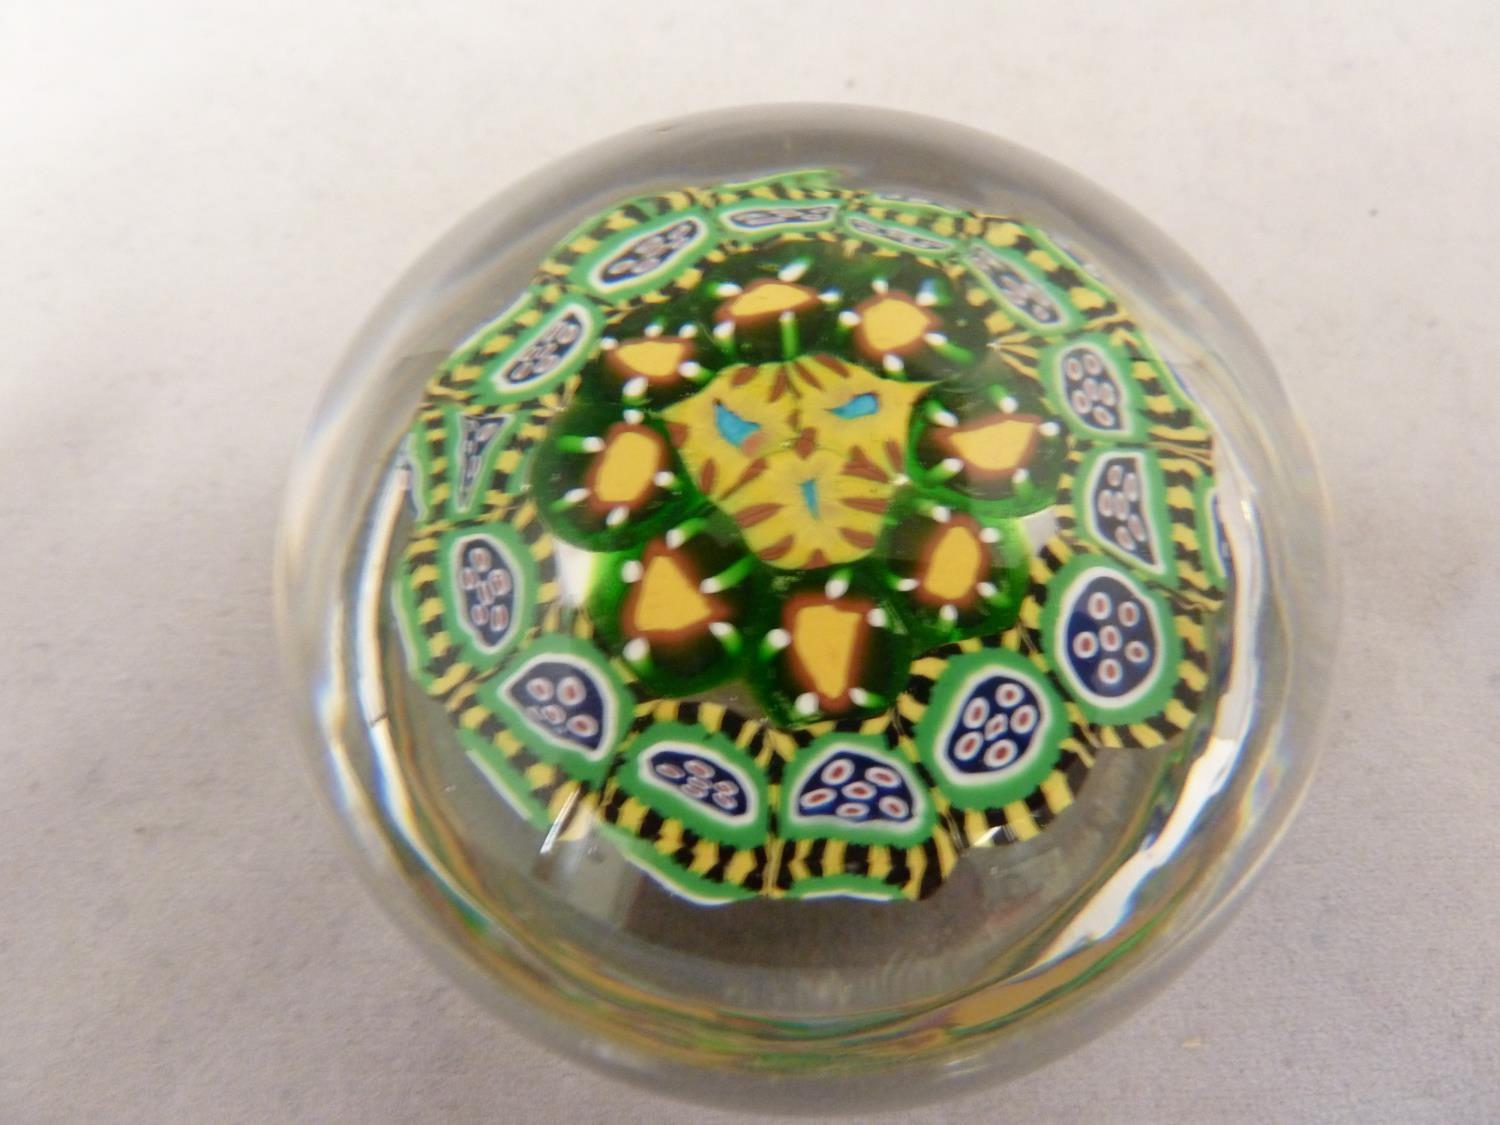 Strathern - a glass paperweight, predominantly of brightly coloured concentric canes in yellow and